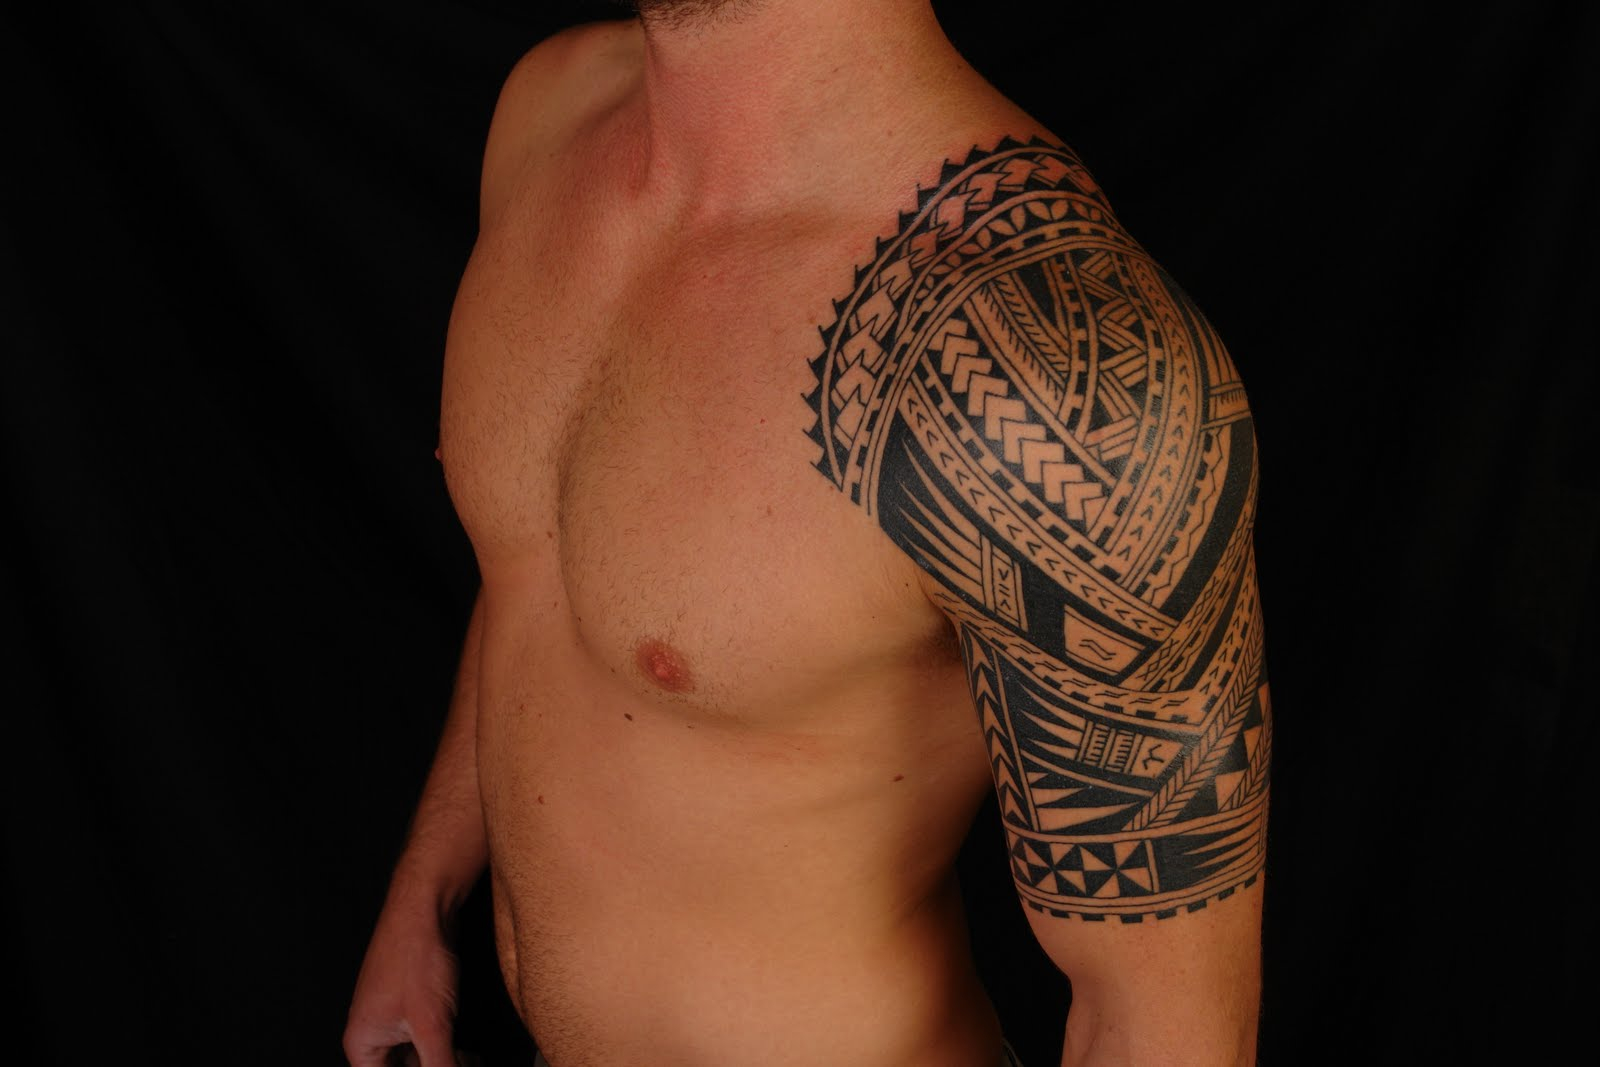 Tribal Shoulder Tattoo Designs Tattoo Ideas Pictures Tattoo in size 1600 X 1067